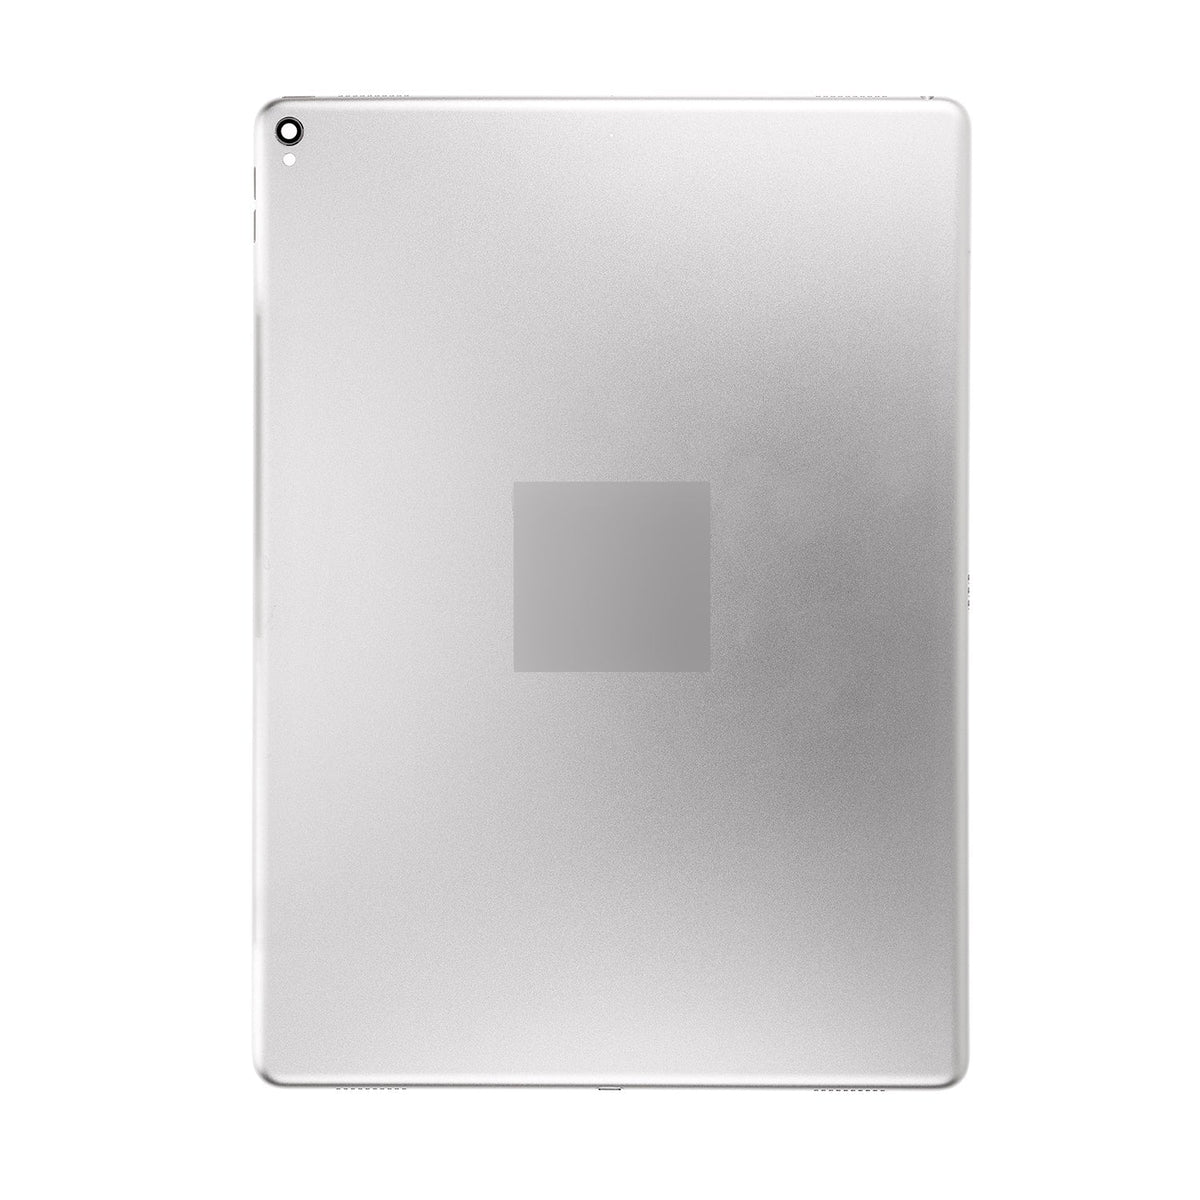 BACK COVER WIFI VERSION FOR IPAD PRO 12.9 2ND GEN SILVER- SILVER